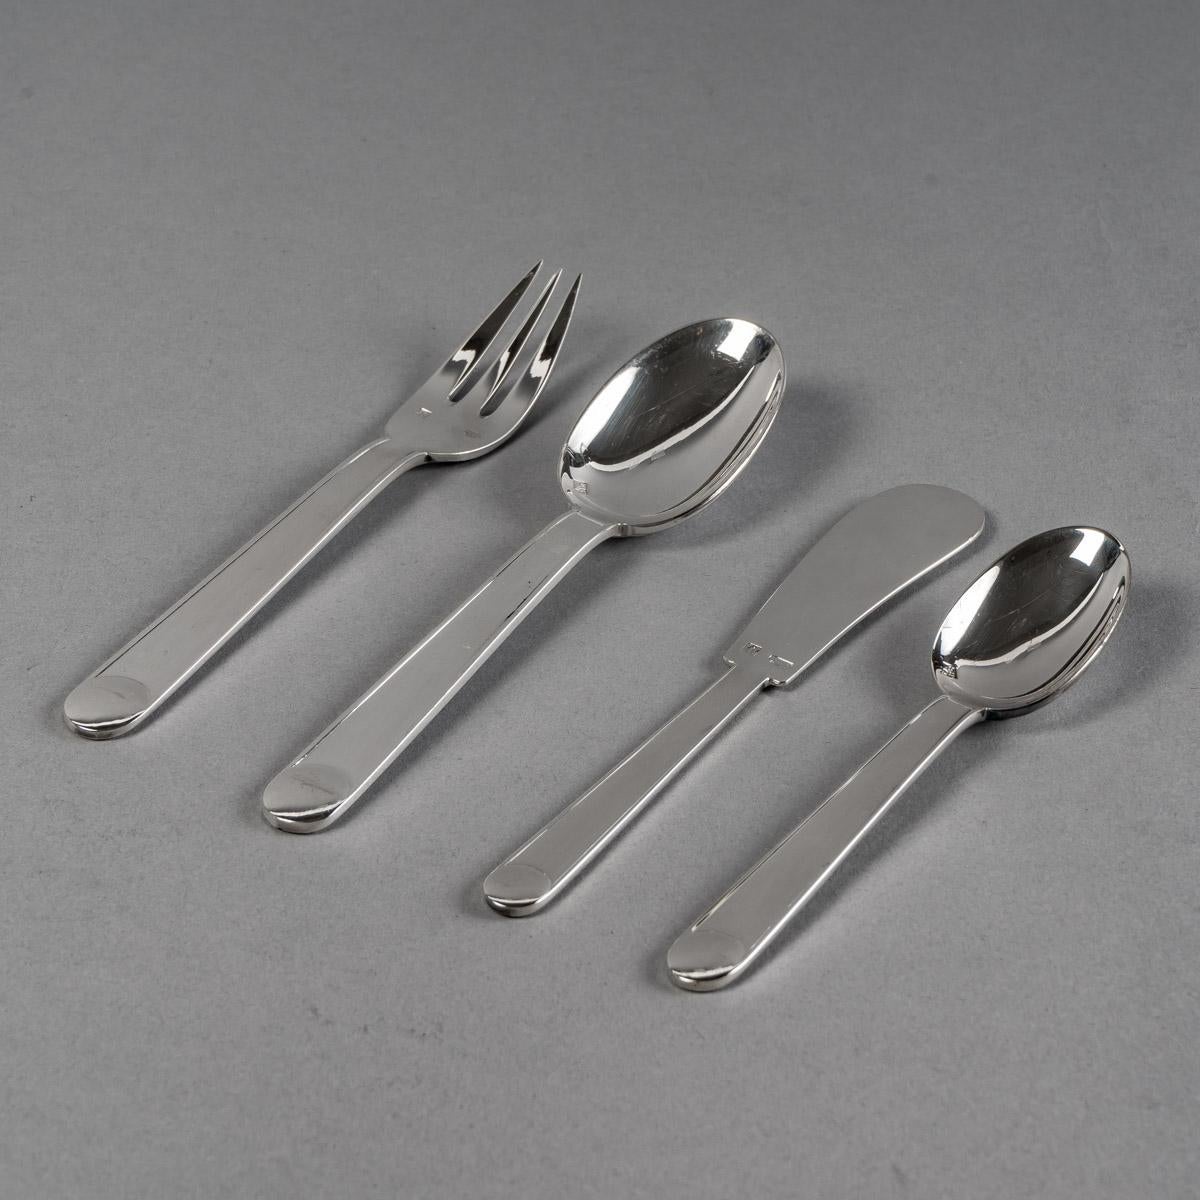 French Jean Puiforcat Cutlery Flatware Set Normandie Plated Silver 6 People, 73 Pieces